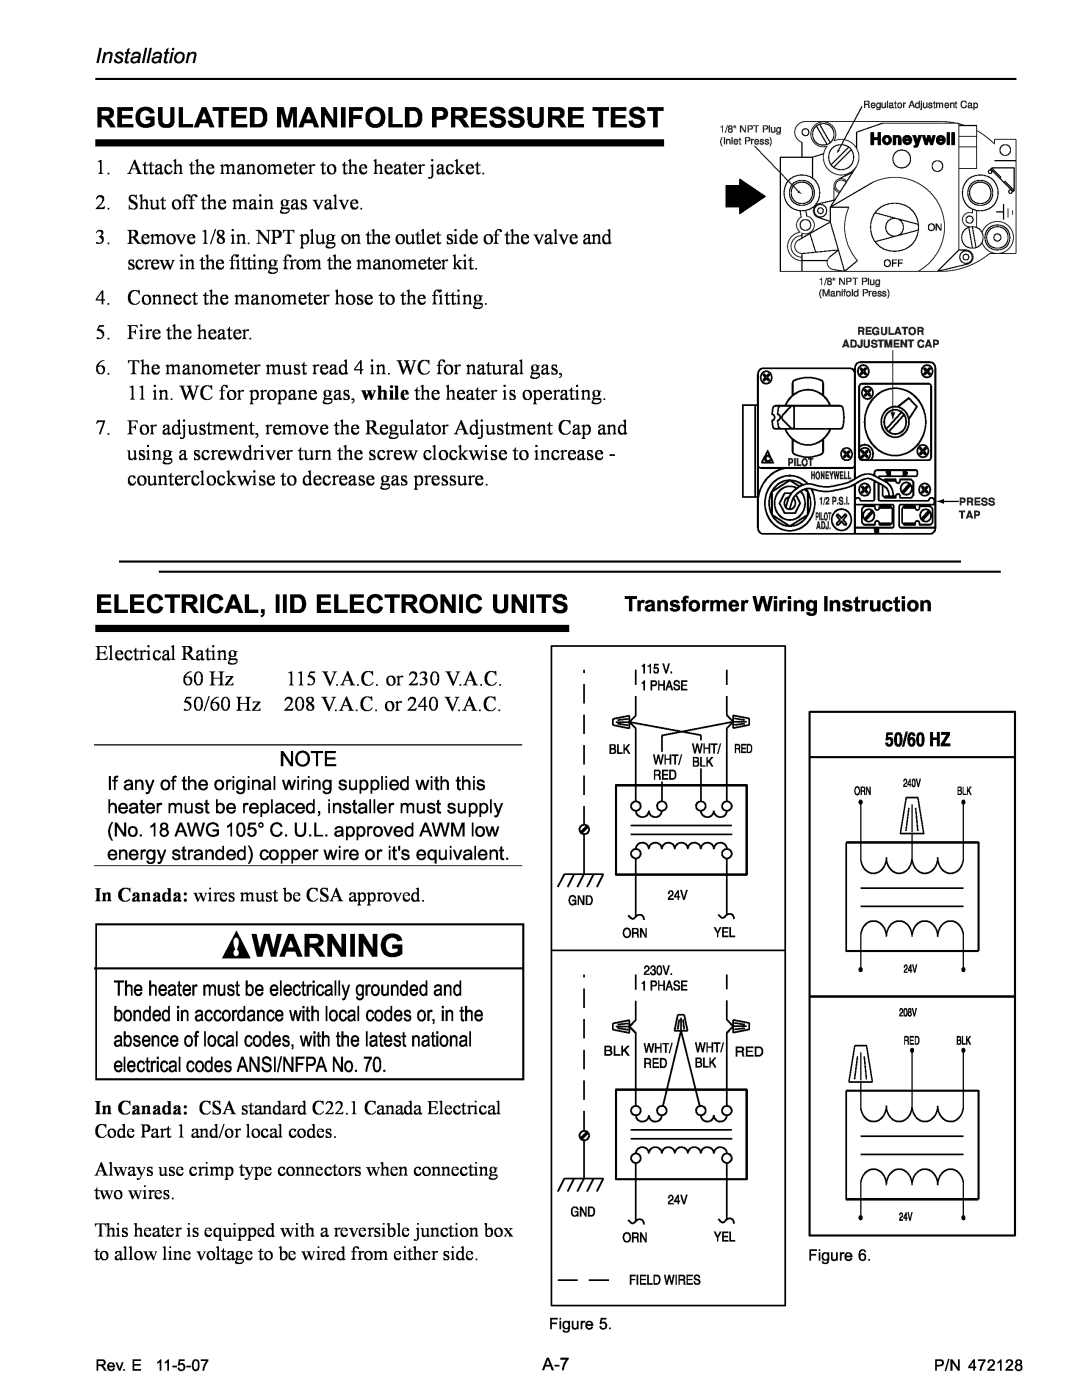 Pentair Hot Tub manual Regulated Manifold Pressure Test, Electrical, Iid Electronic Units 